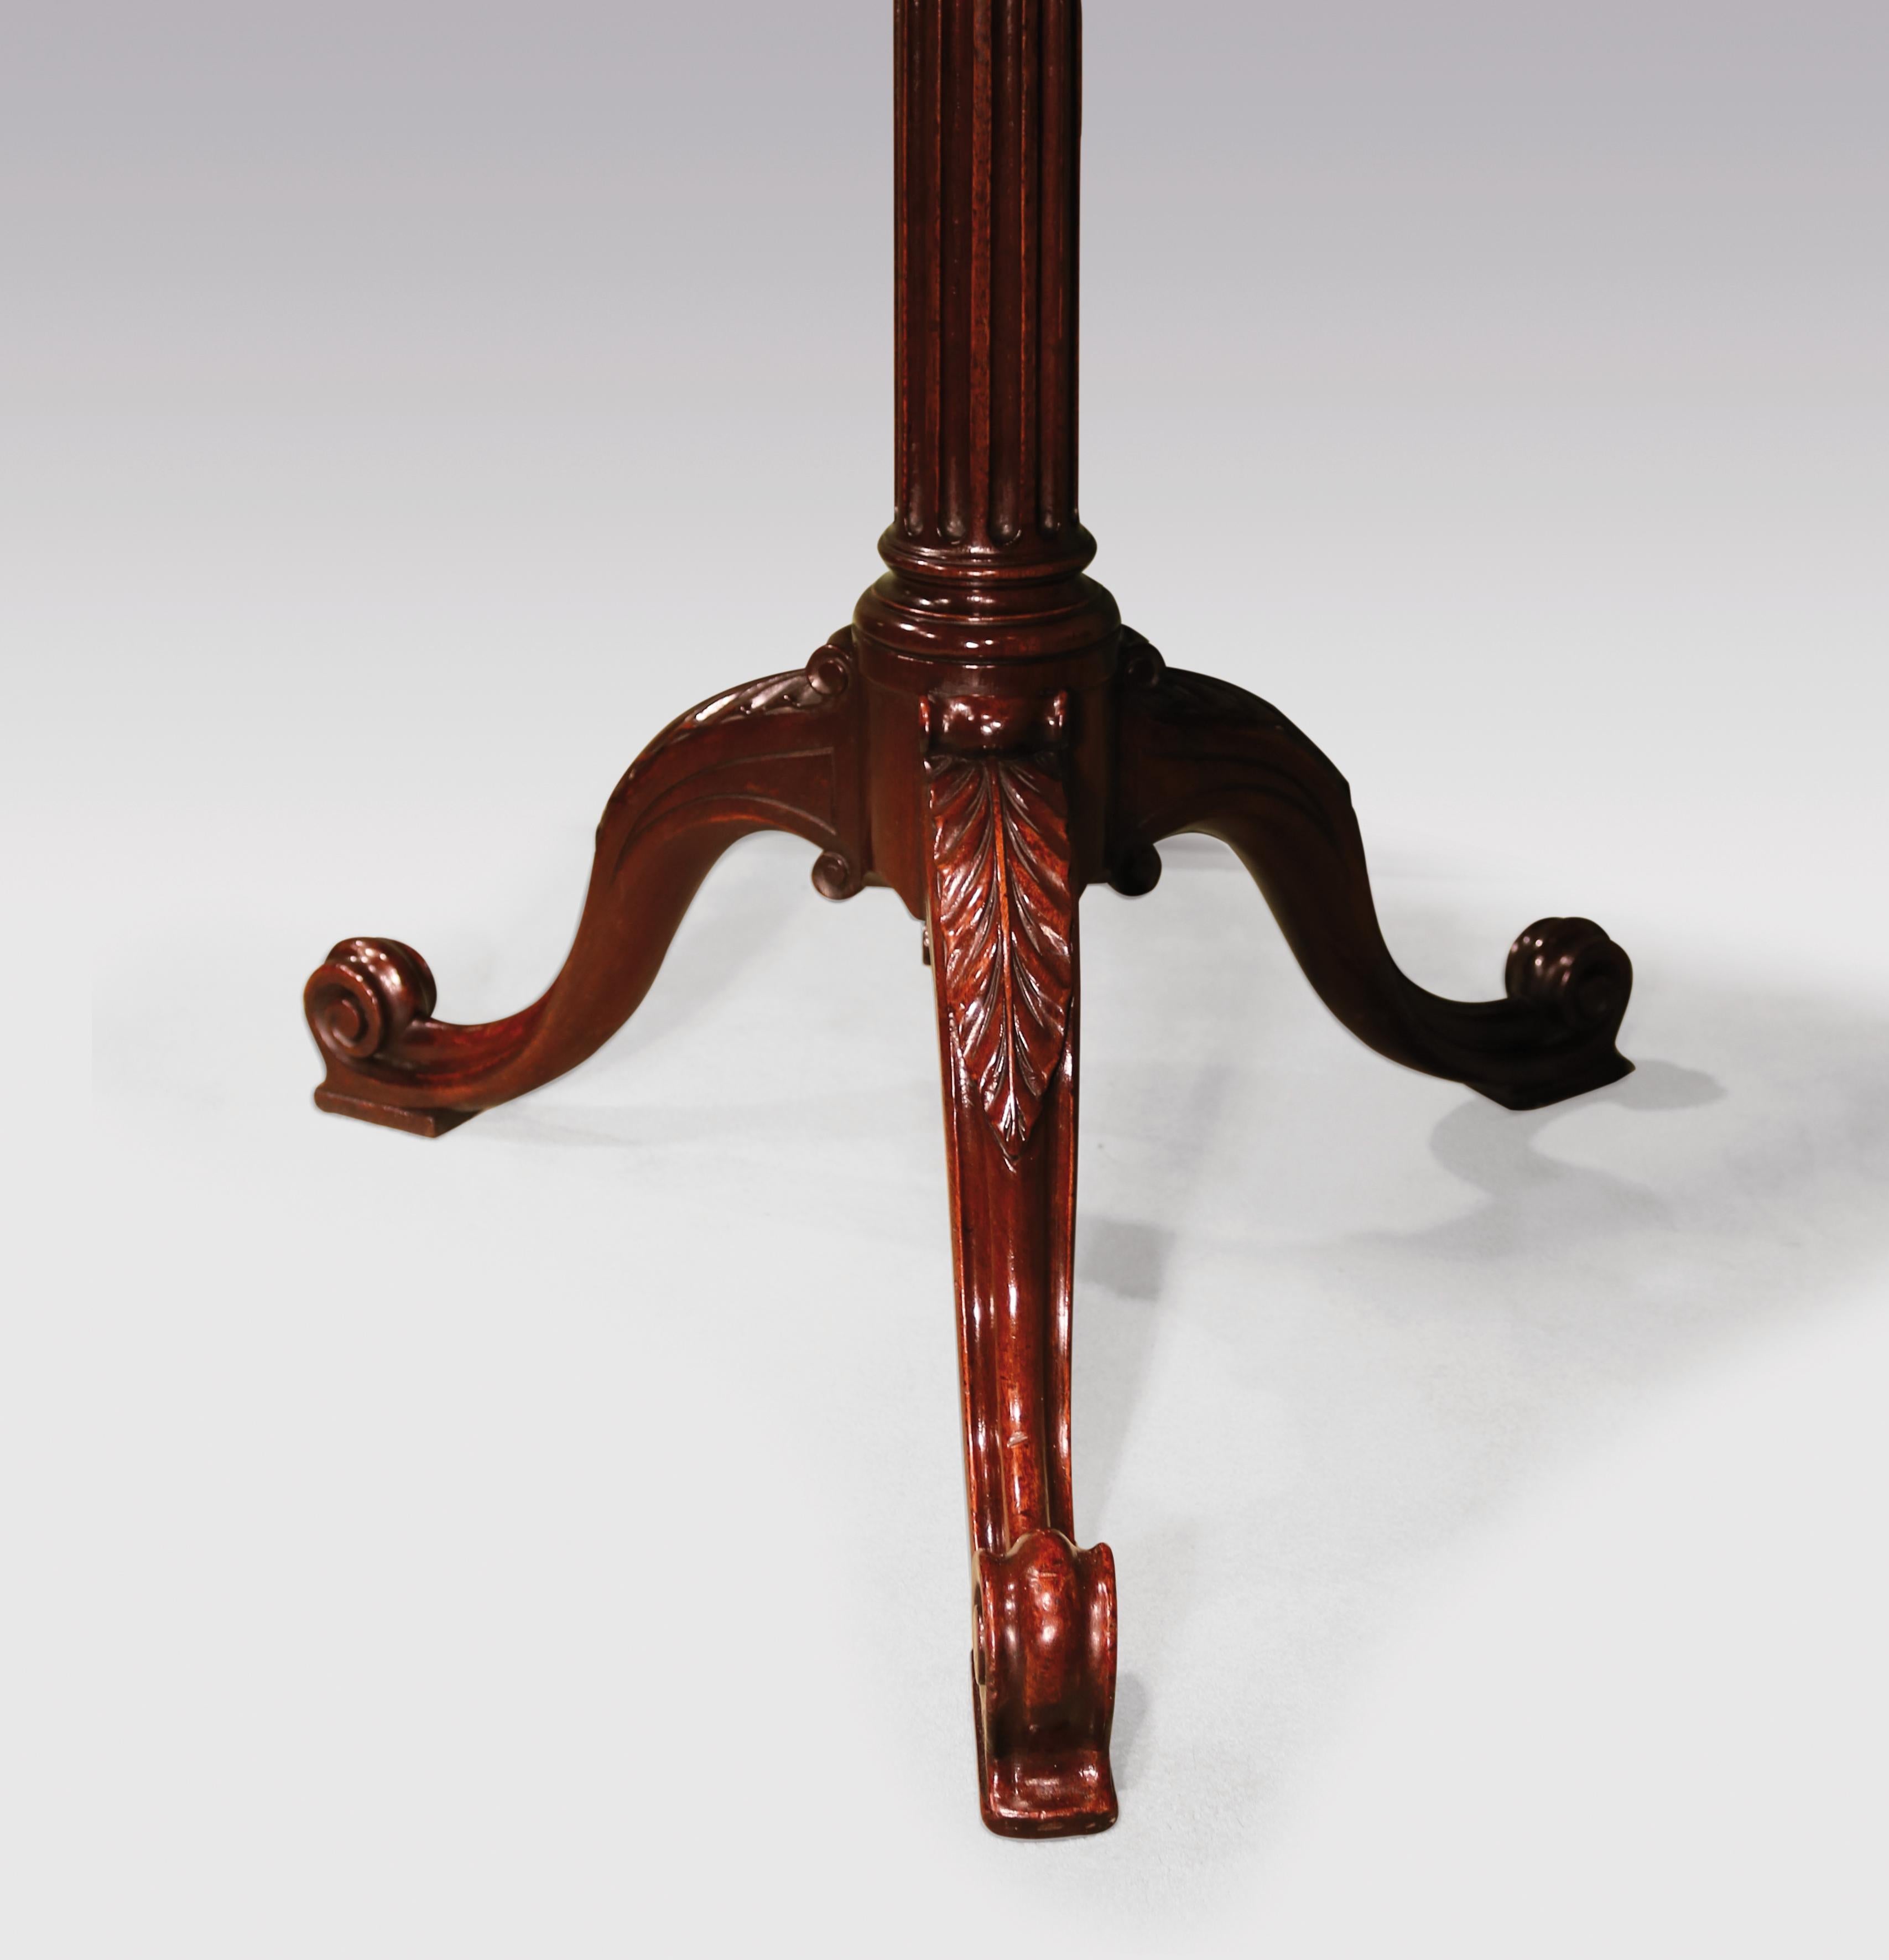 Chippendale 18th Century Figured Mahogany Tripod Table